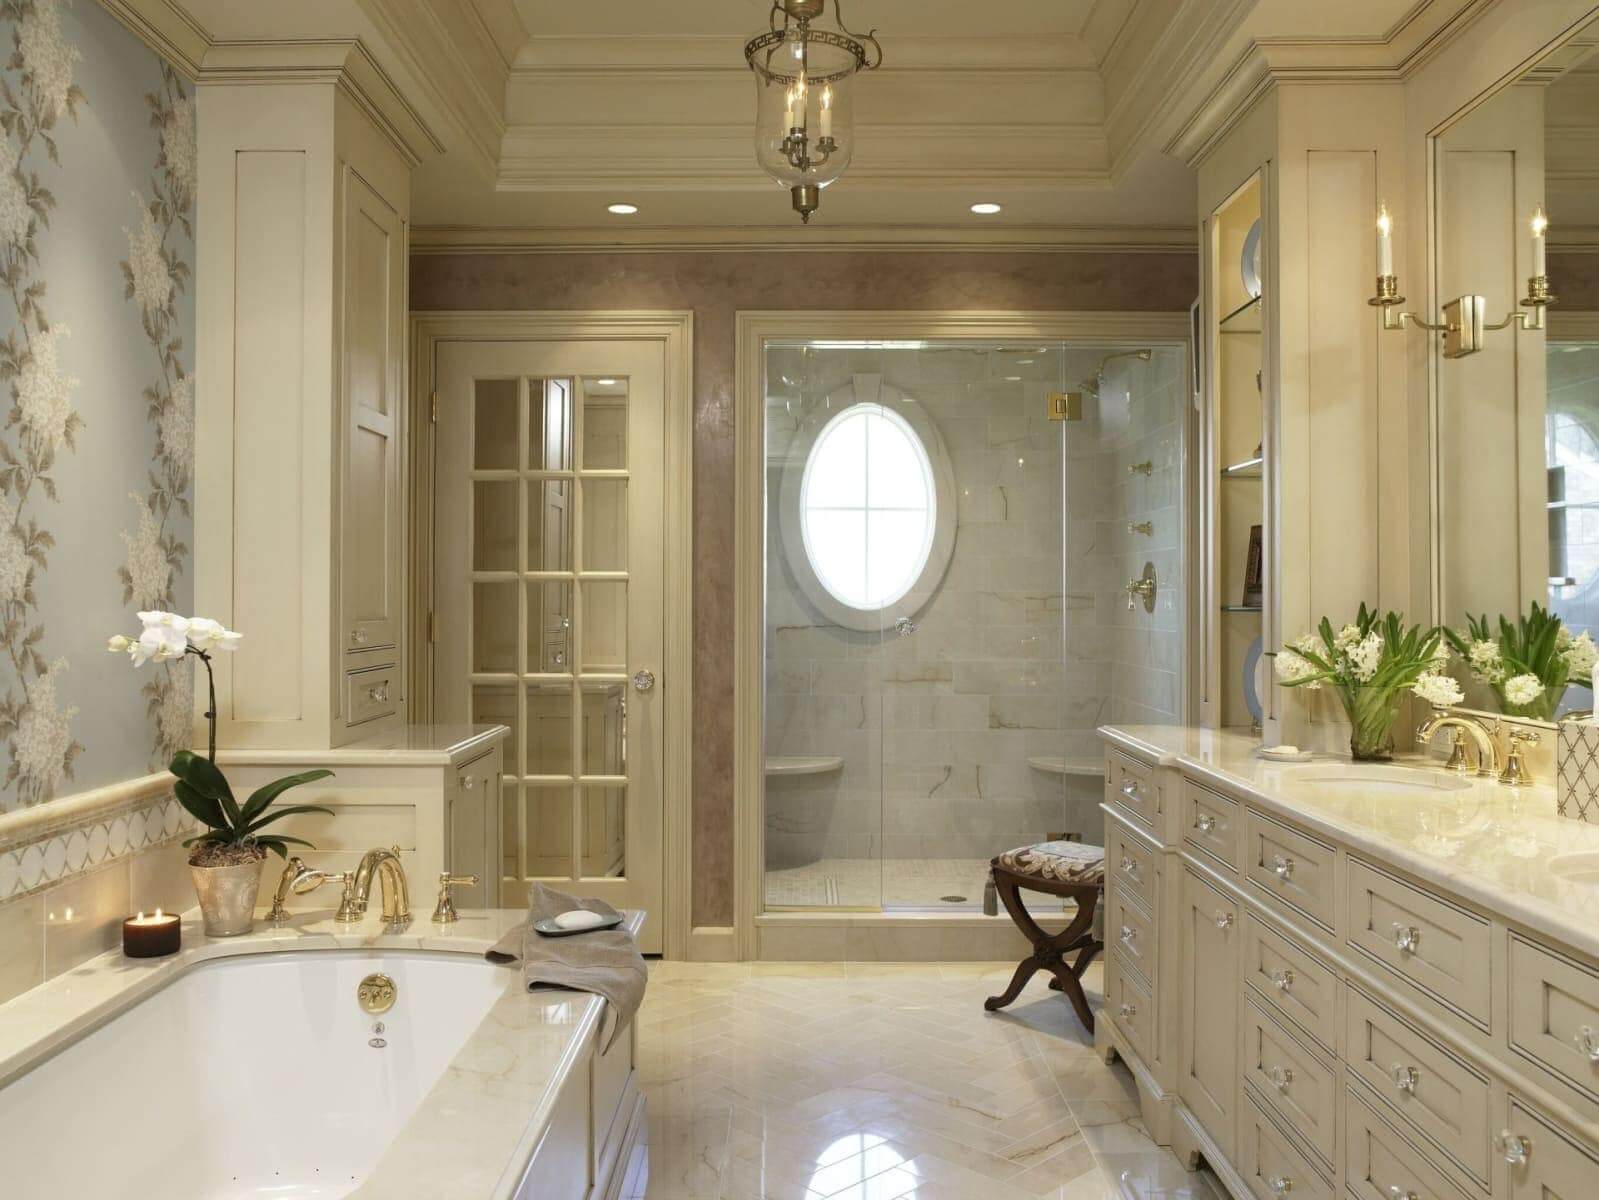 Classic elegance with a marble tiled bathroom